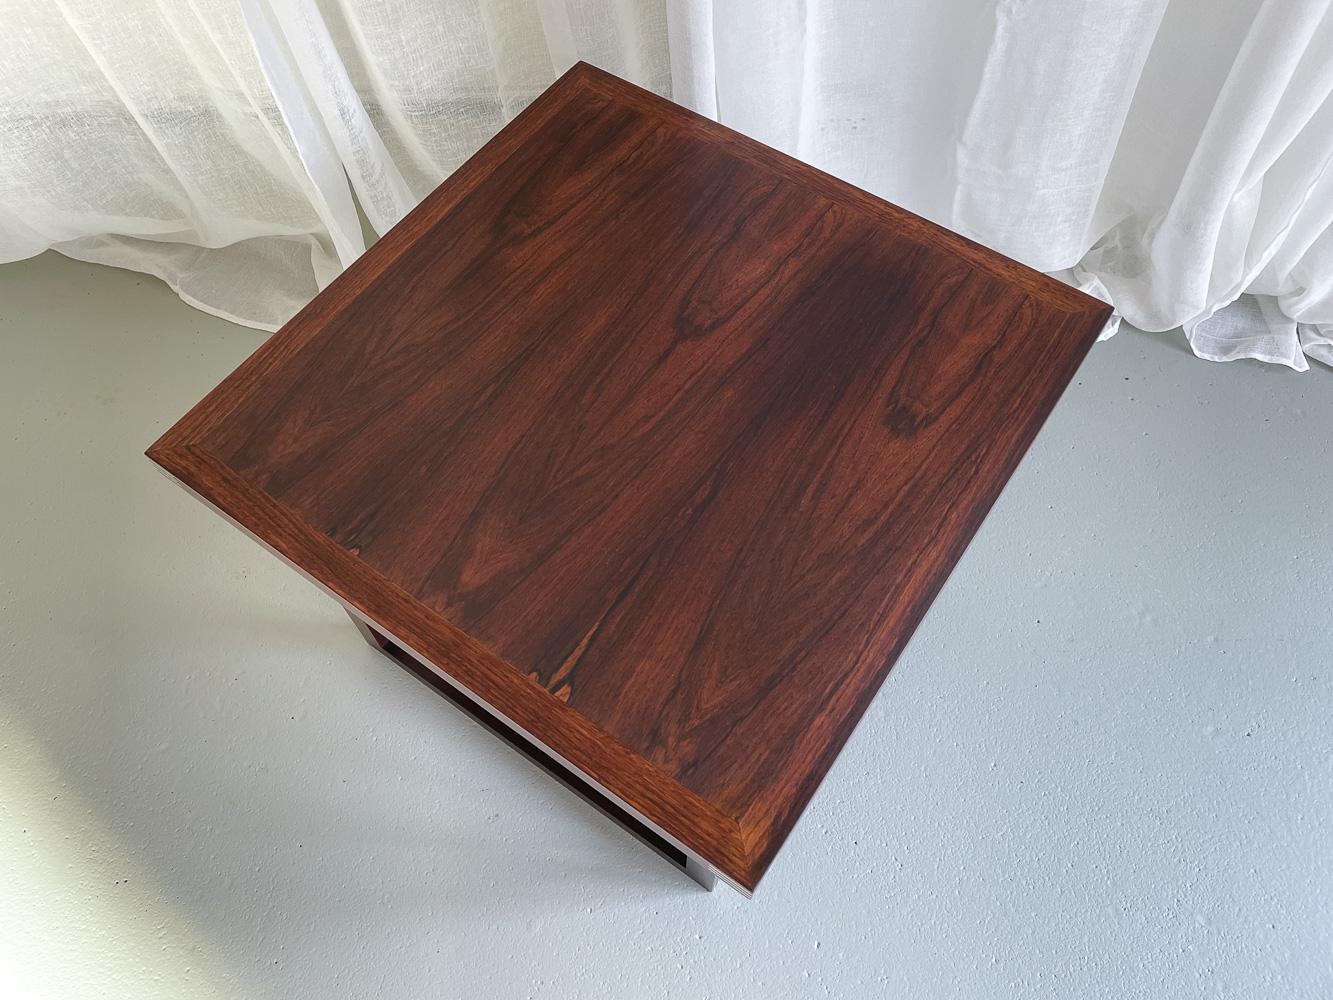 Danish Modern Rosewood Side Table by Rud Thygesen for Heltborg Møbler, 1960s.
Scandinavian Mid-Century Modern coffee or side table Model 45 in Rosewood/palisander with aluminium inlays. Designed by architect Rud Thygesen for Heltborg Møbler,